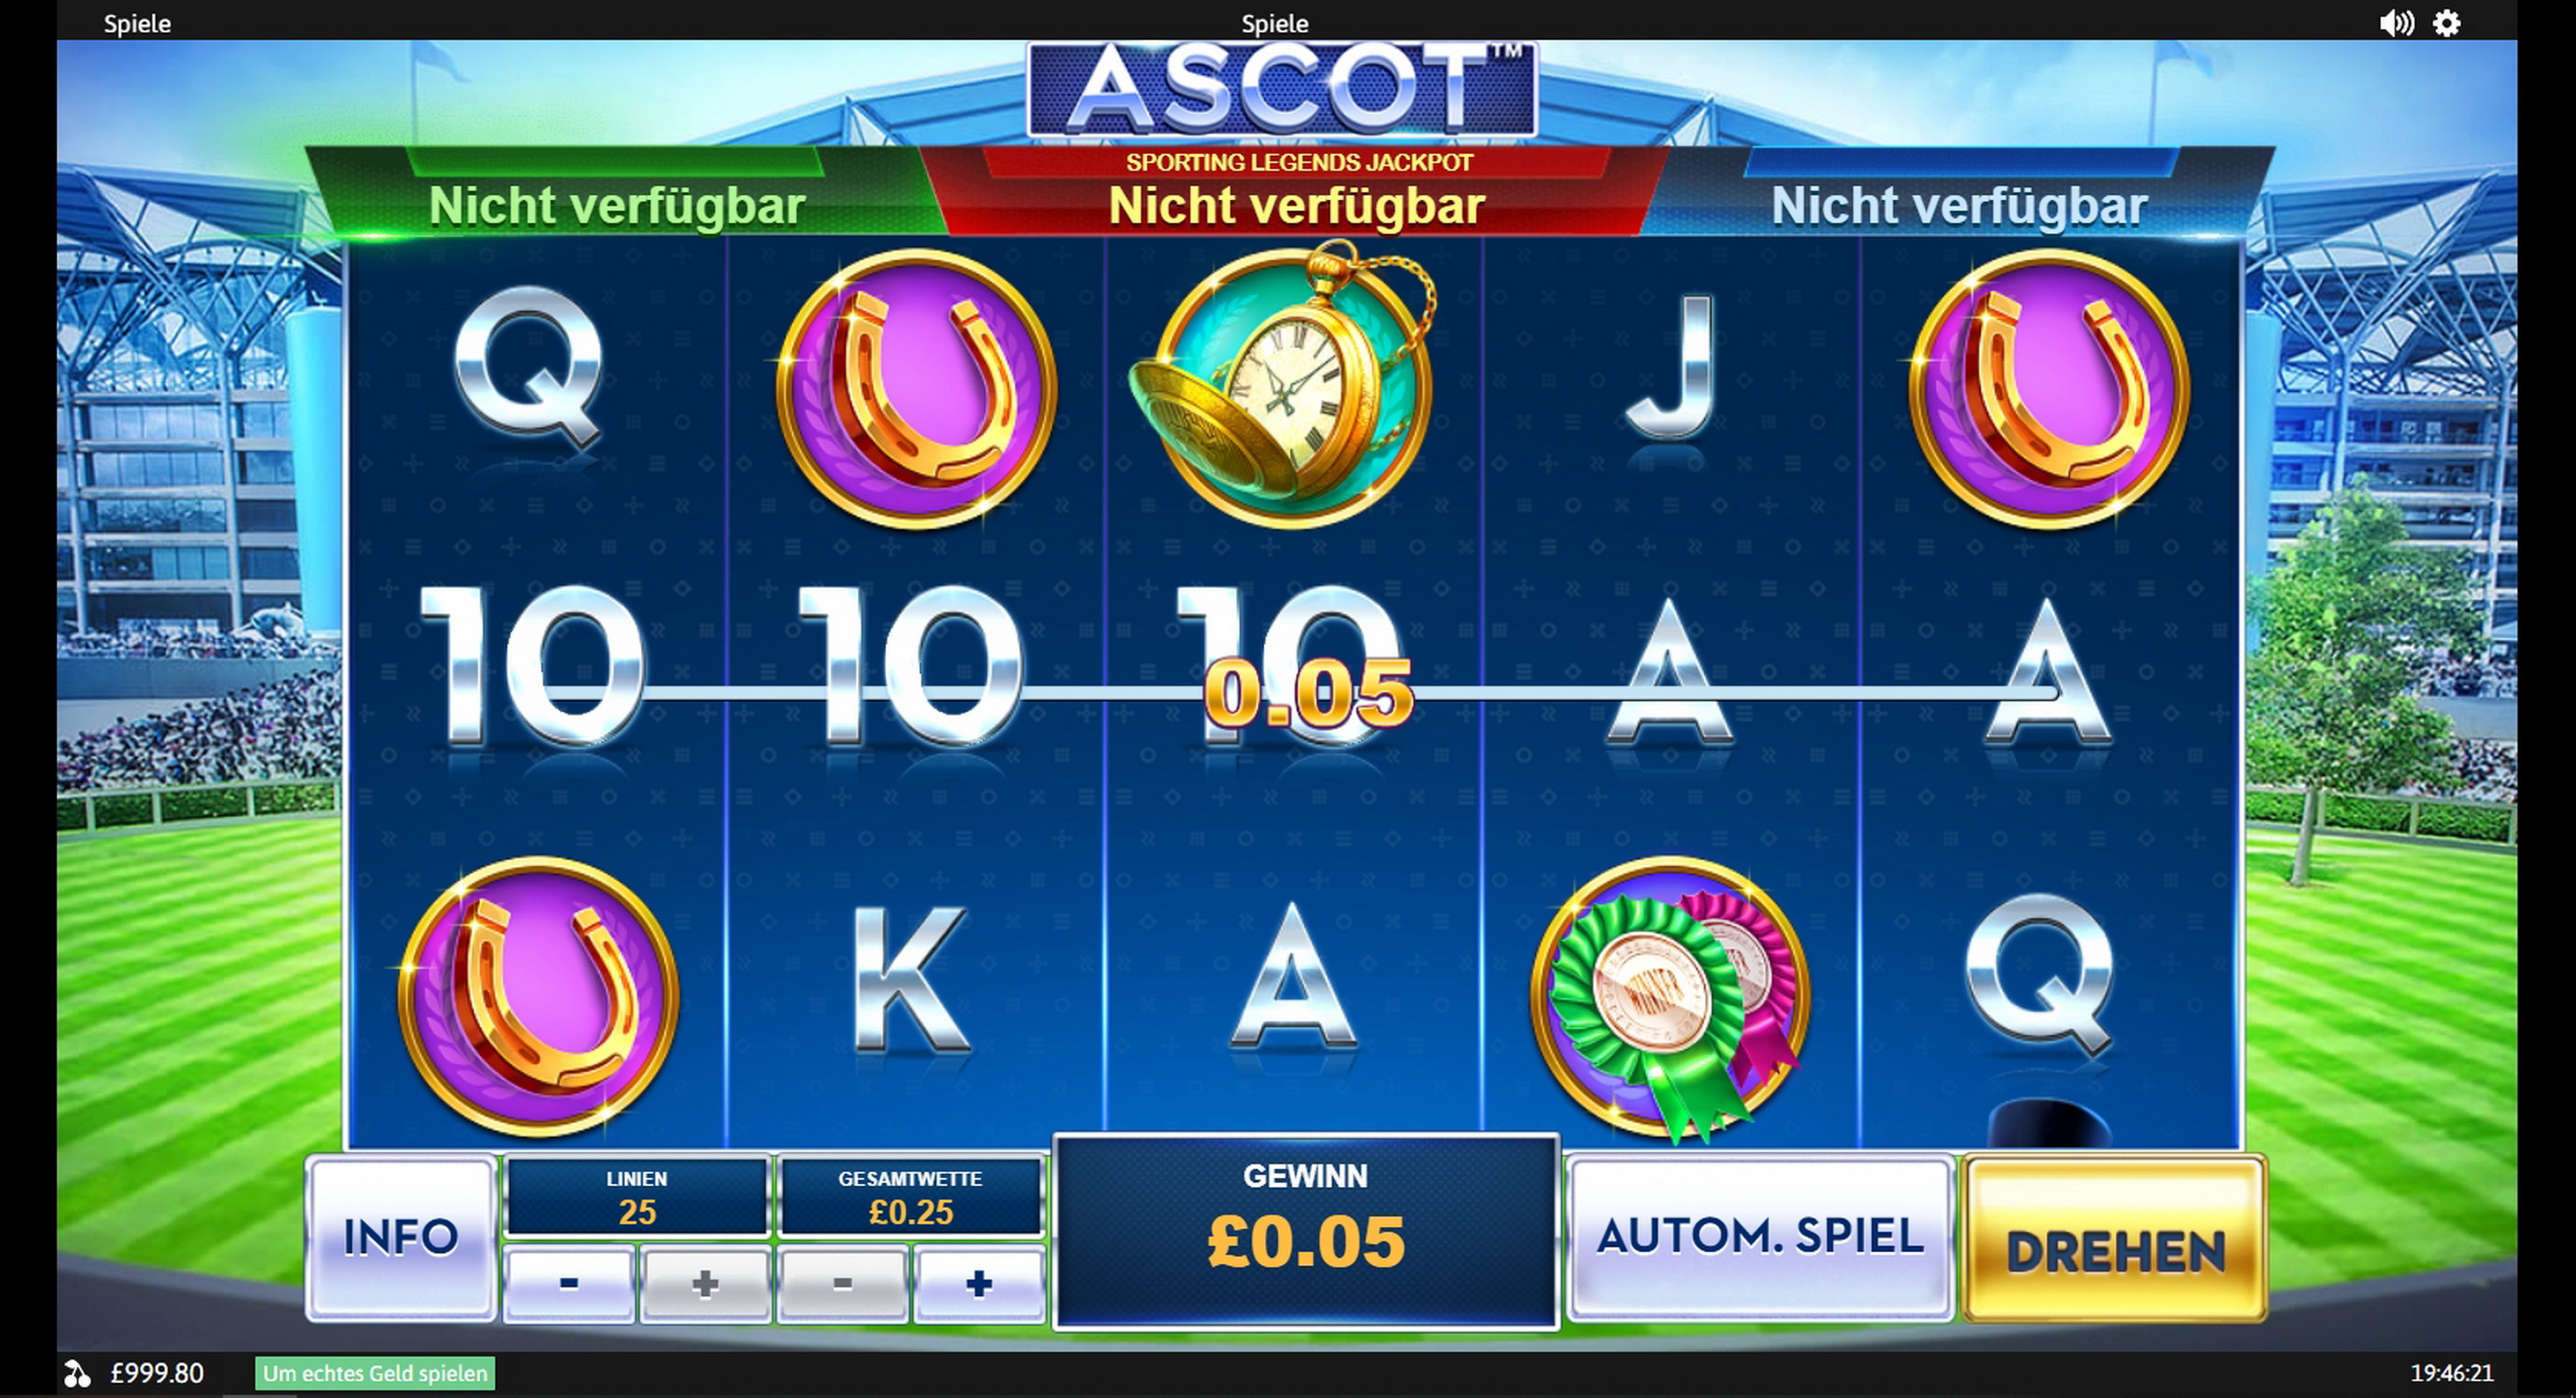 Win Money in Ascot - Sporting Legends Free Slot Game by Playtech